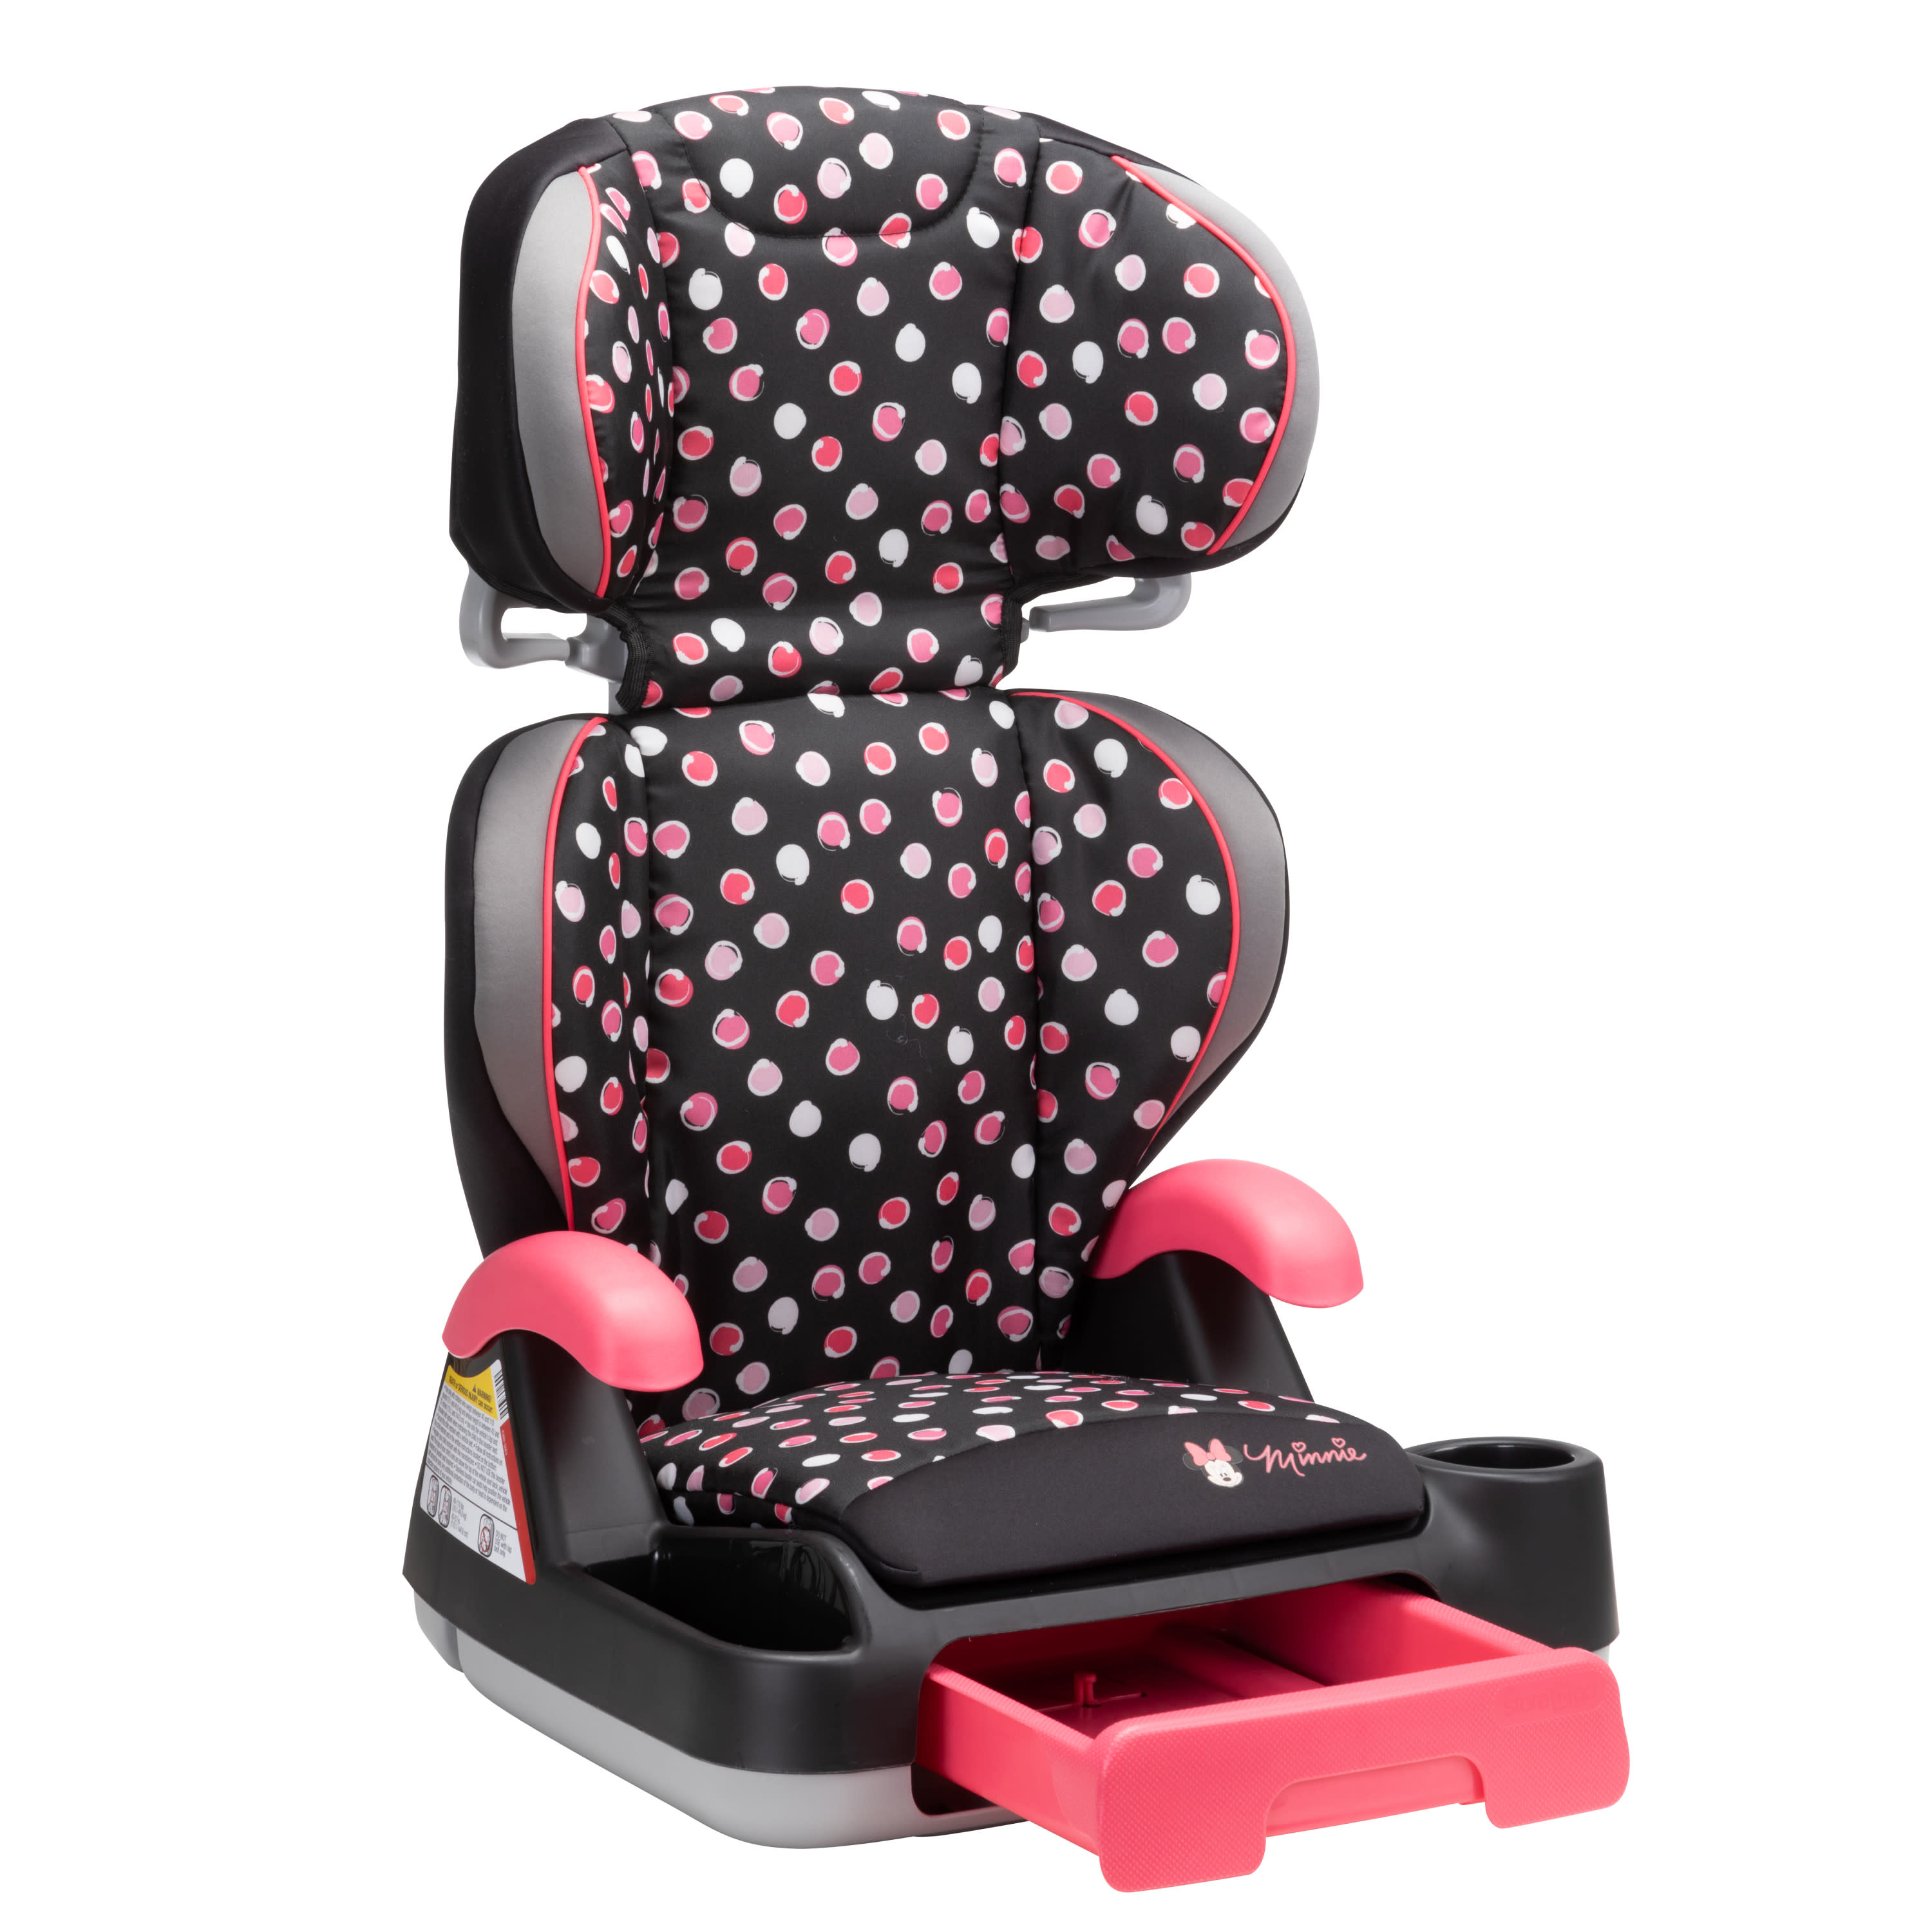 Disney Baby Store 'n Go Sport Booster Car Seat, Minnie Mash Up - image 9 of 21